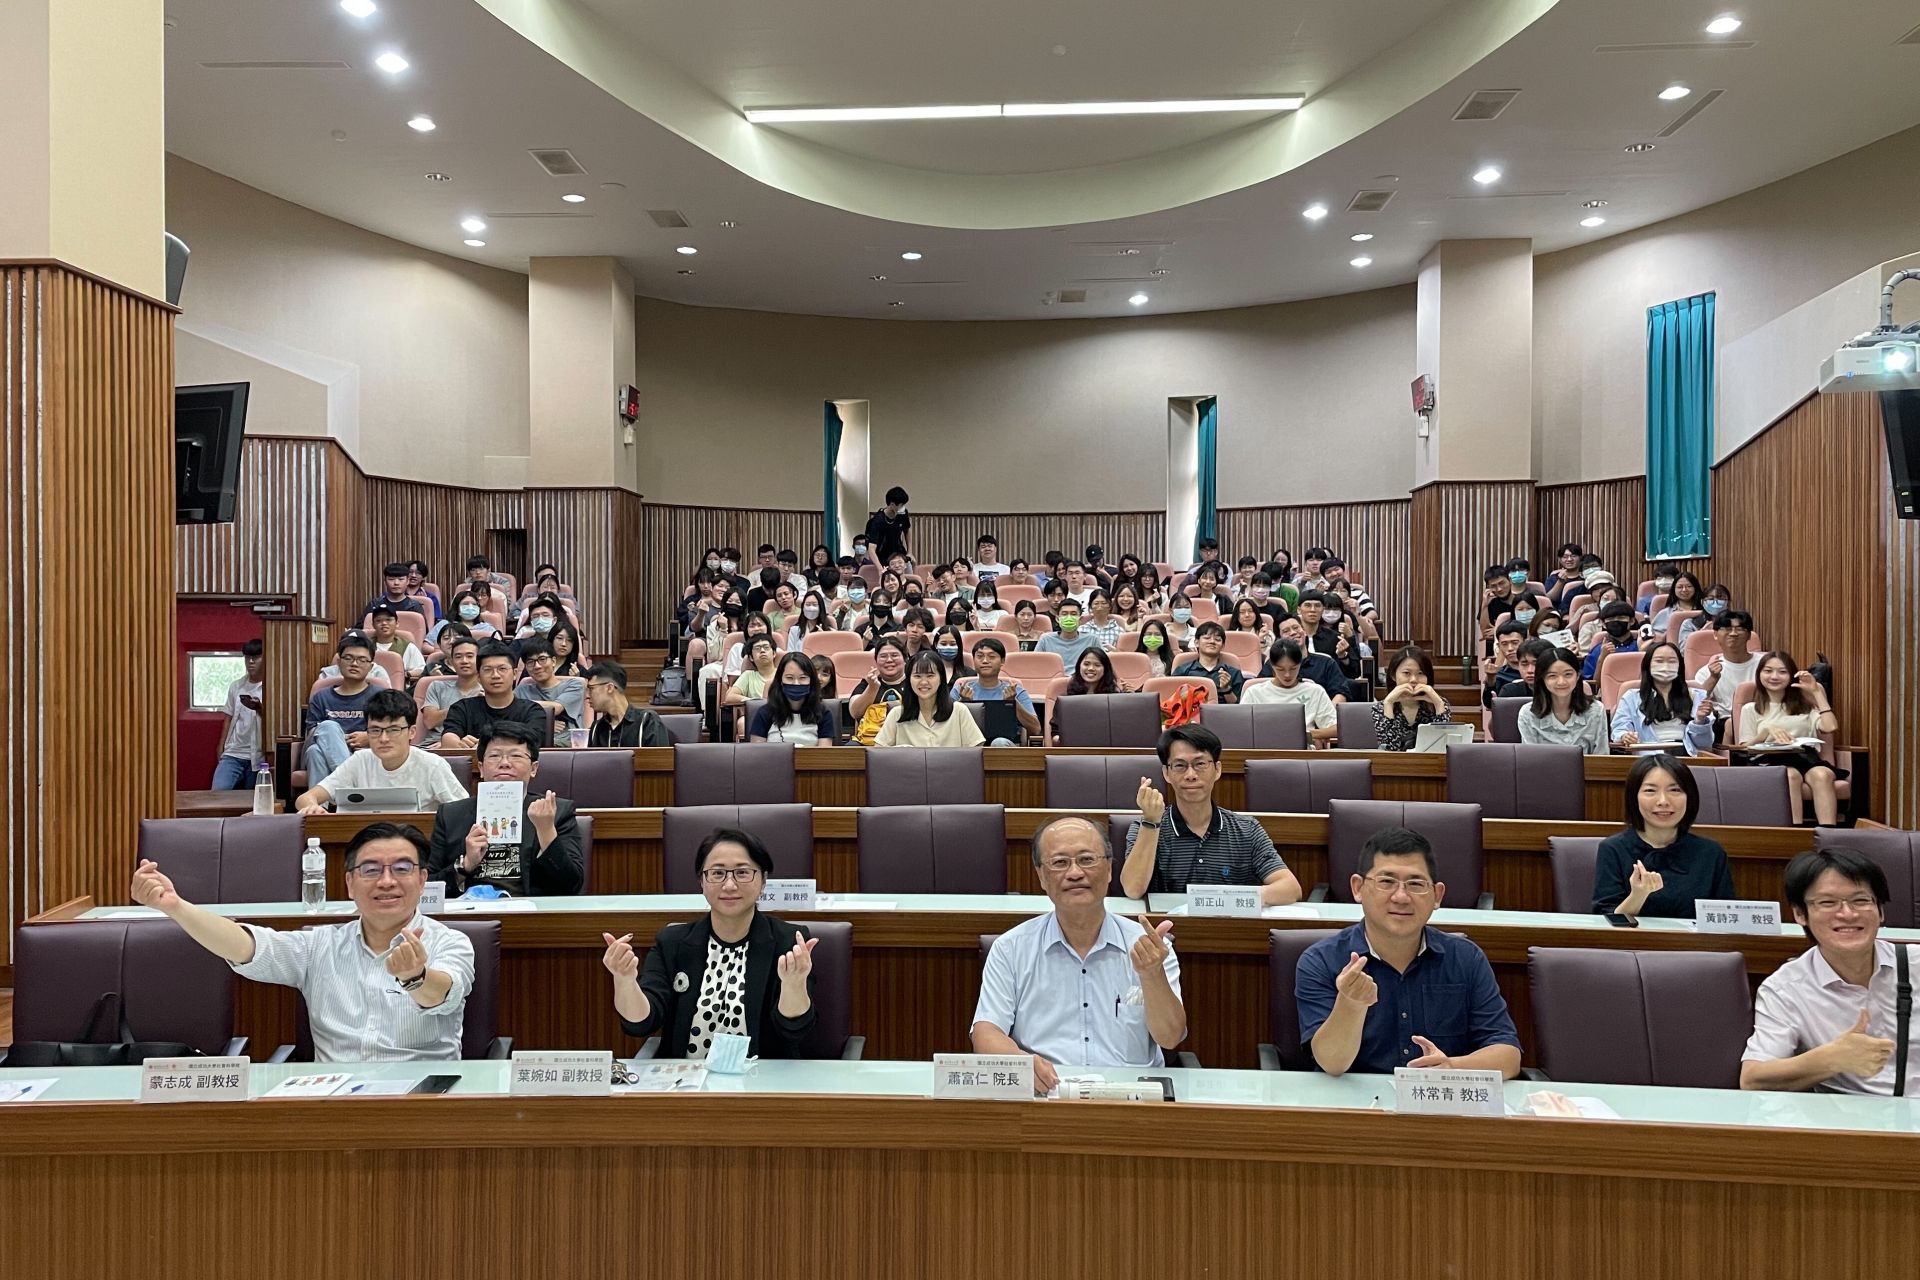 NCKU College of Social Sciences Credit Program's End-of-Term Joint Achievement Exhibition held an online popularity award event.